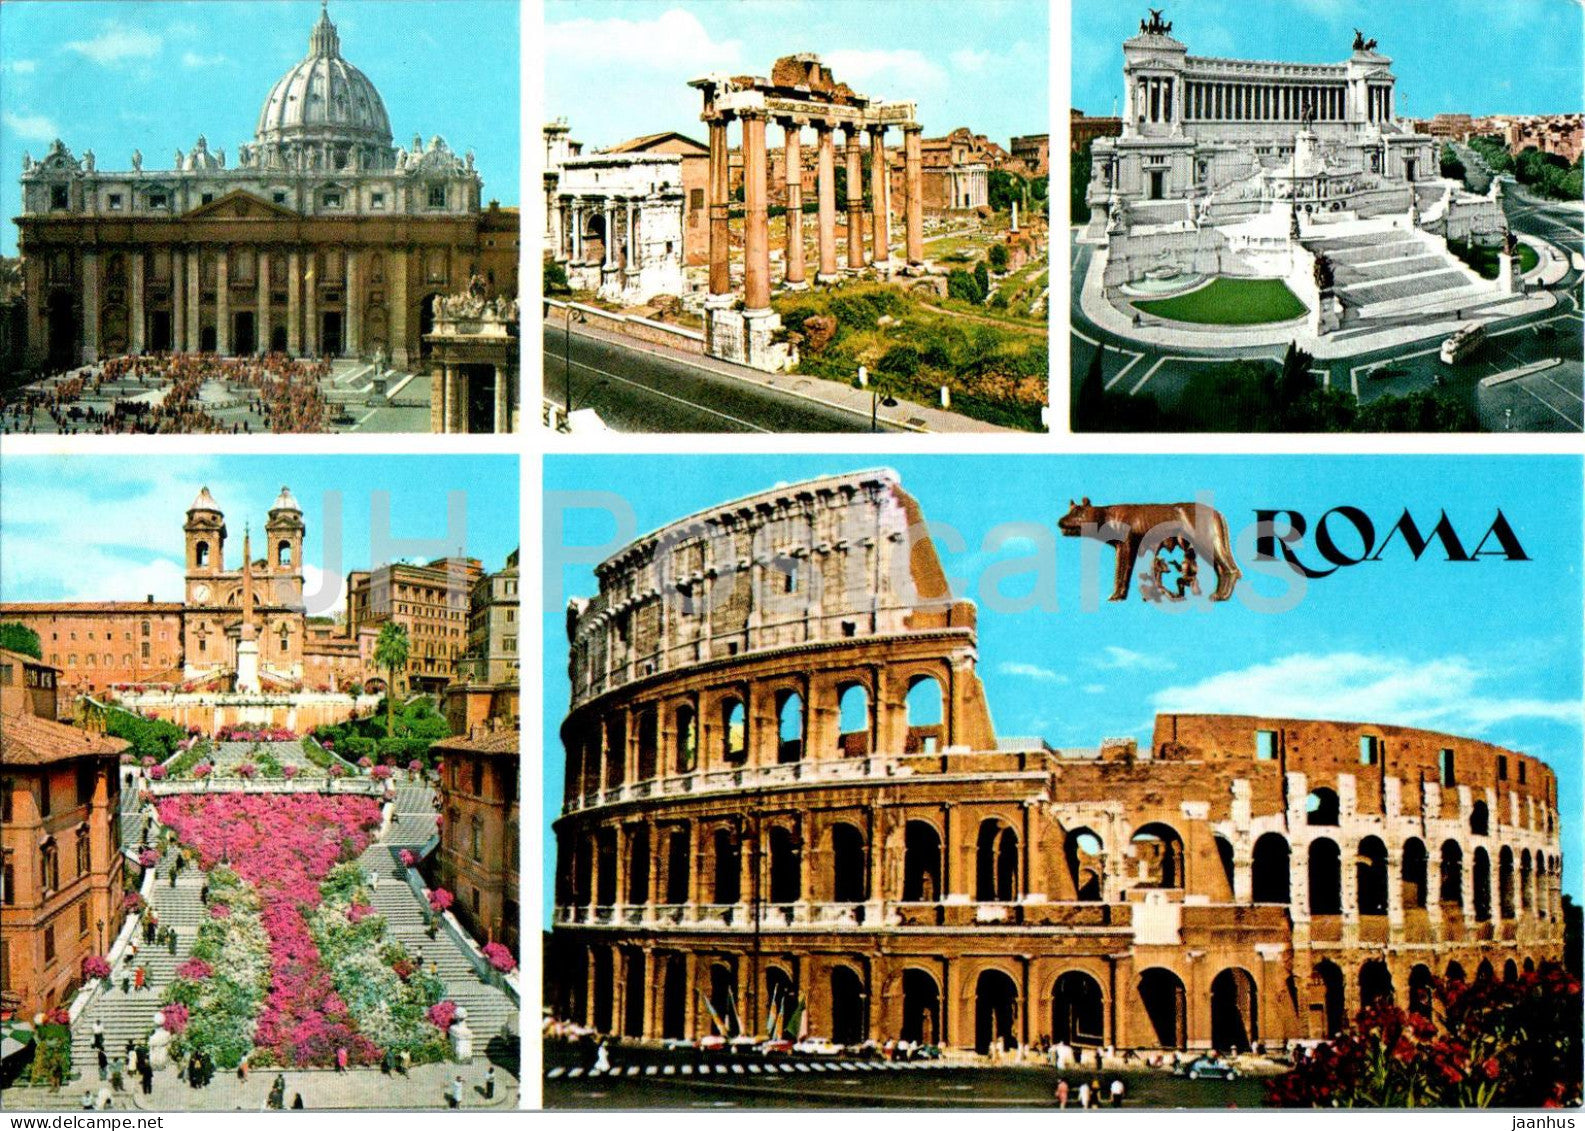 Roma - Rome - Colosseum - St Peter's Cathedral - multiview - 1/60 - Italy - unused - JH Postcards